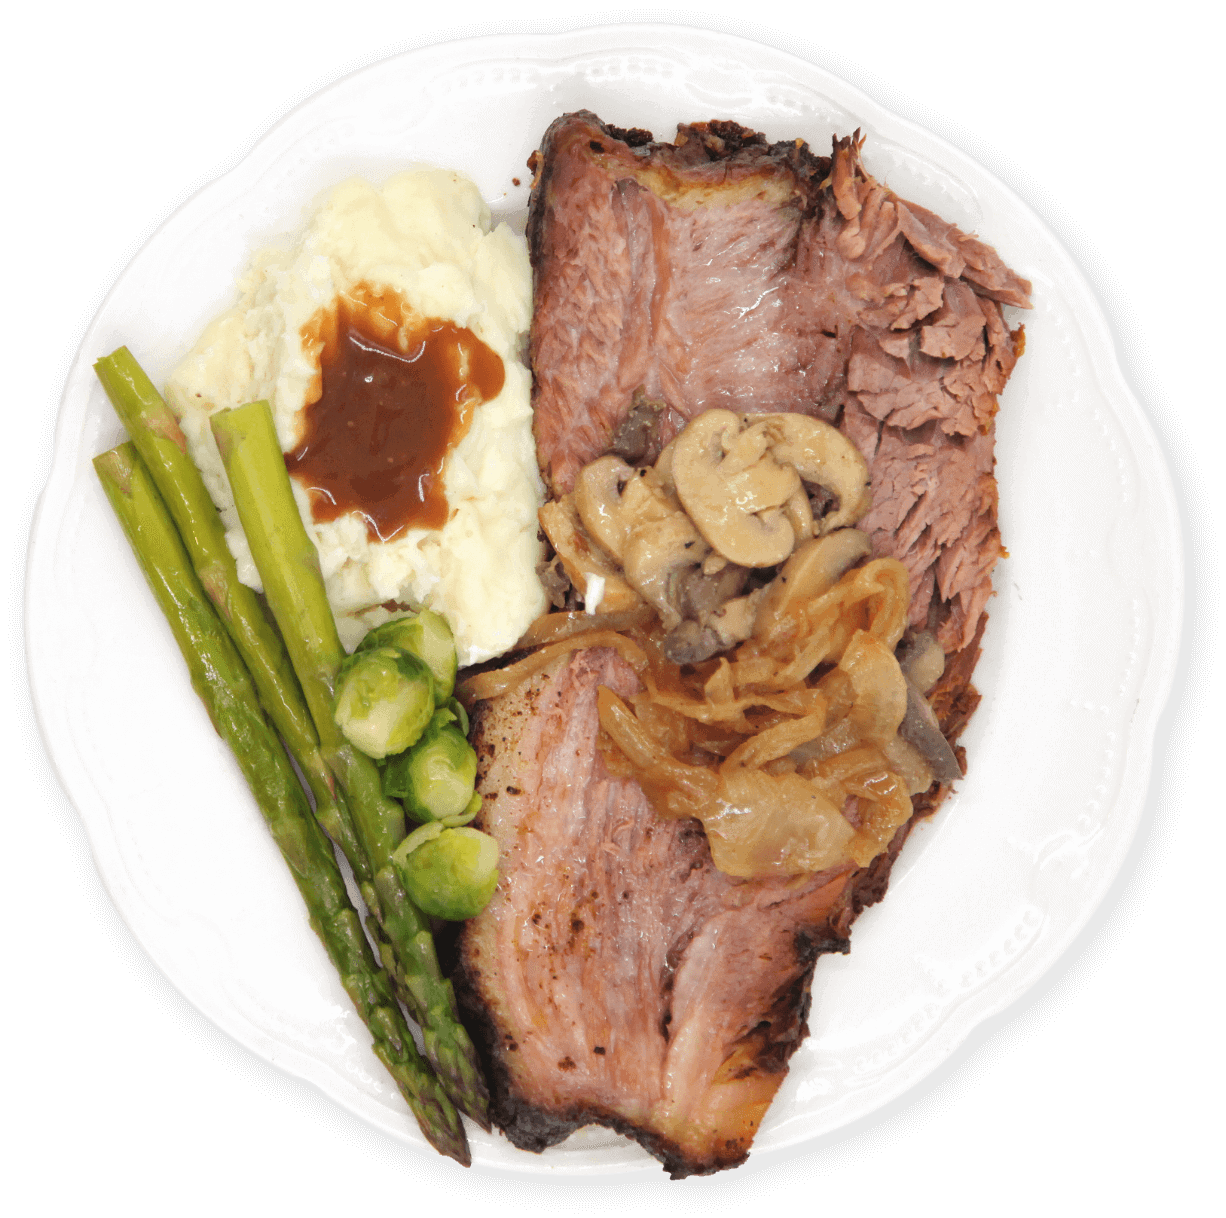 Wednesday Special with prime rib, asparagus, mushrooms, onions, brussel sprouts and mashed potatos.